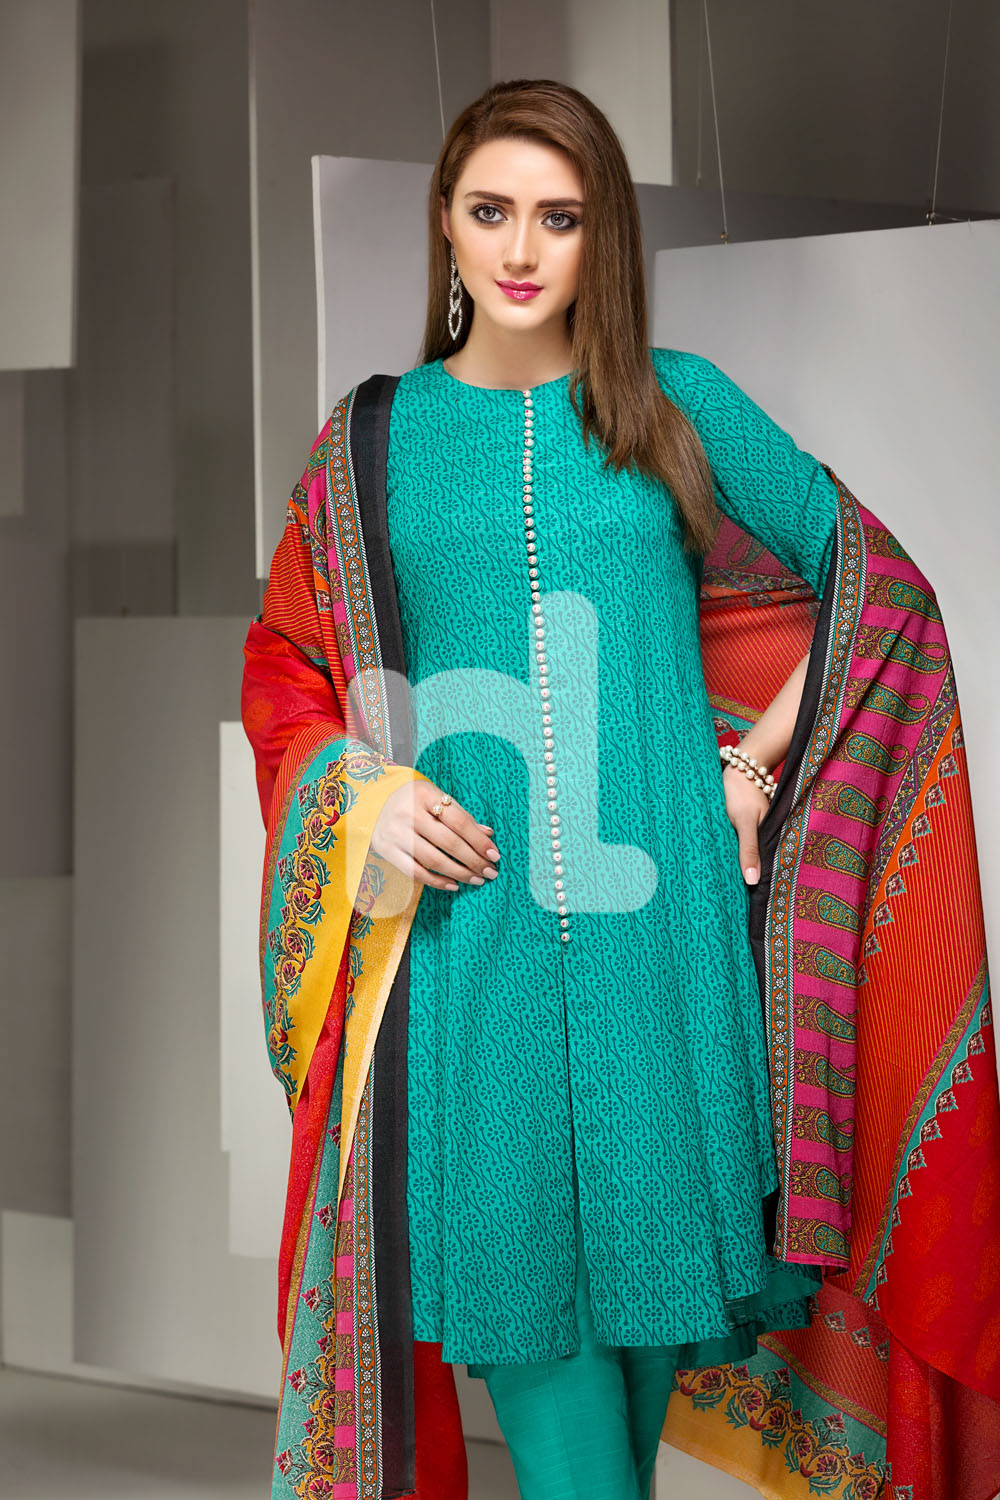 Unstitched 3 Piece Aqua Color Khaddar Pakistani Dress On Sale To Buy Online By Nishat Linen Winter Collection 2017 At A Discount Price.